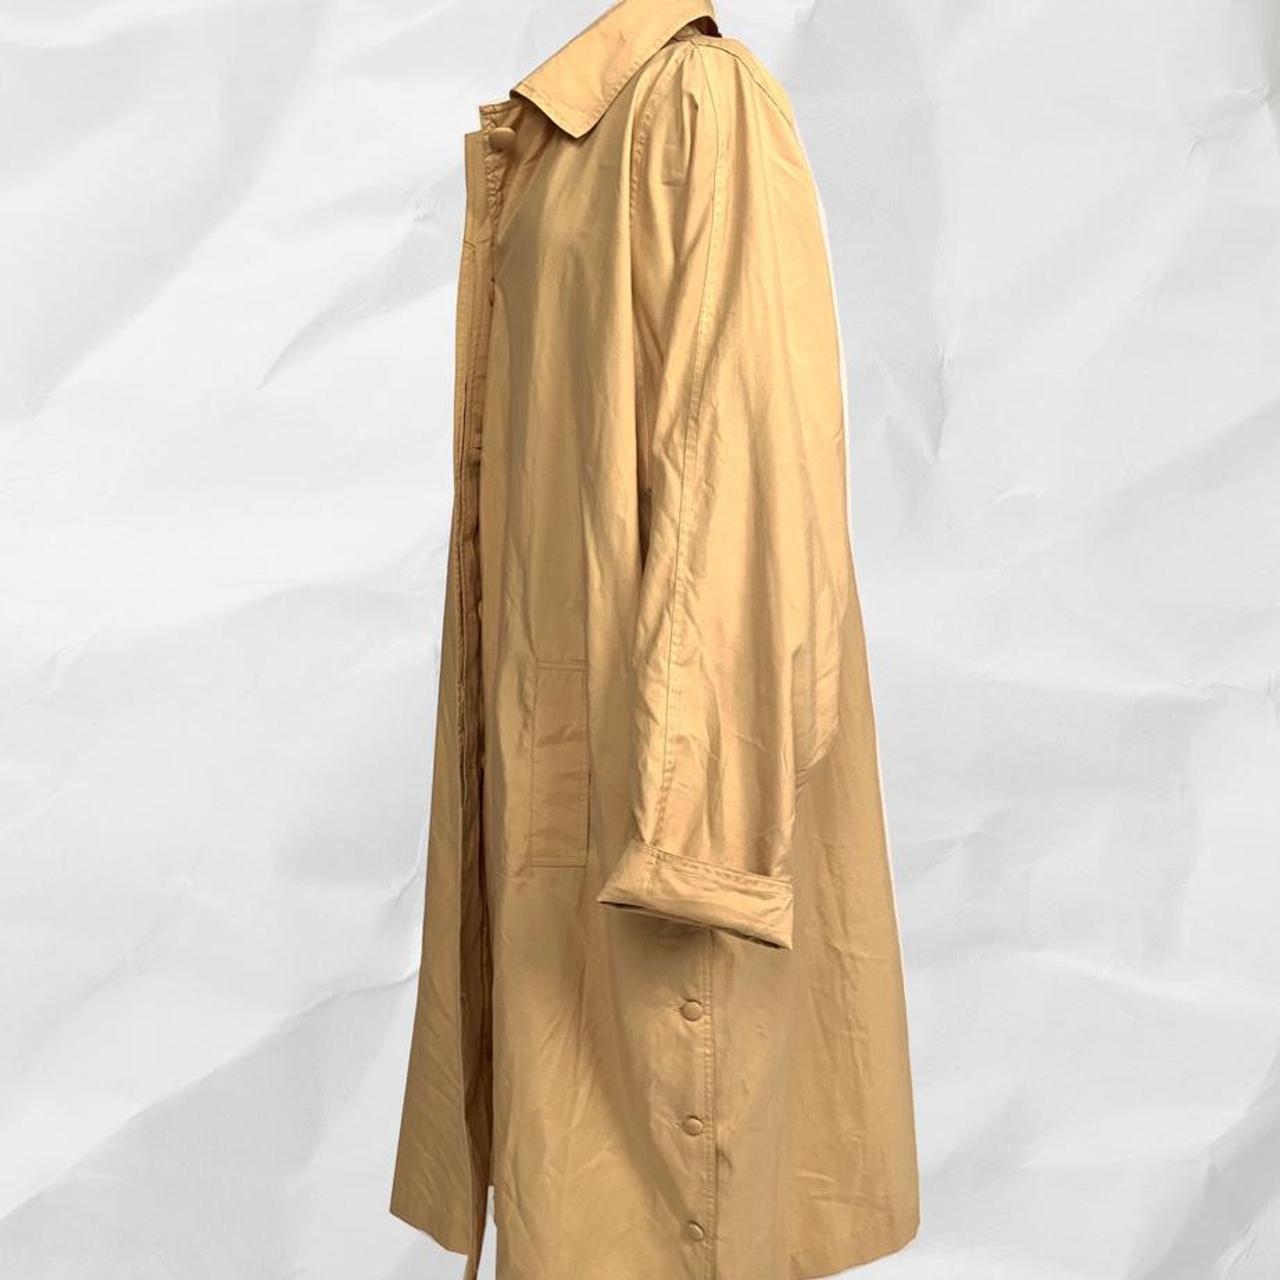 Product Image 1 - Roamans yellow trench coat 
Super